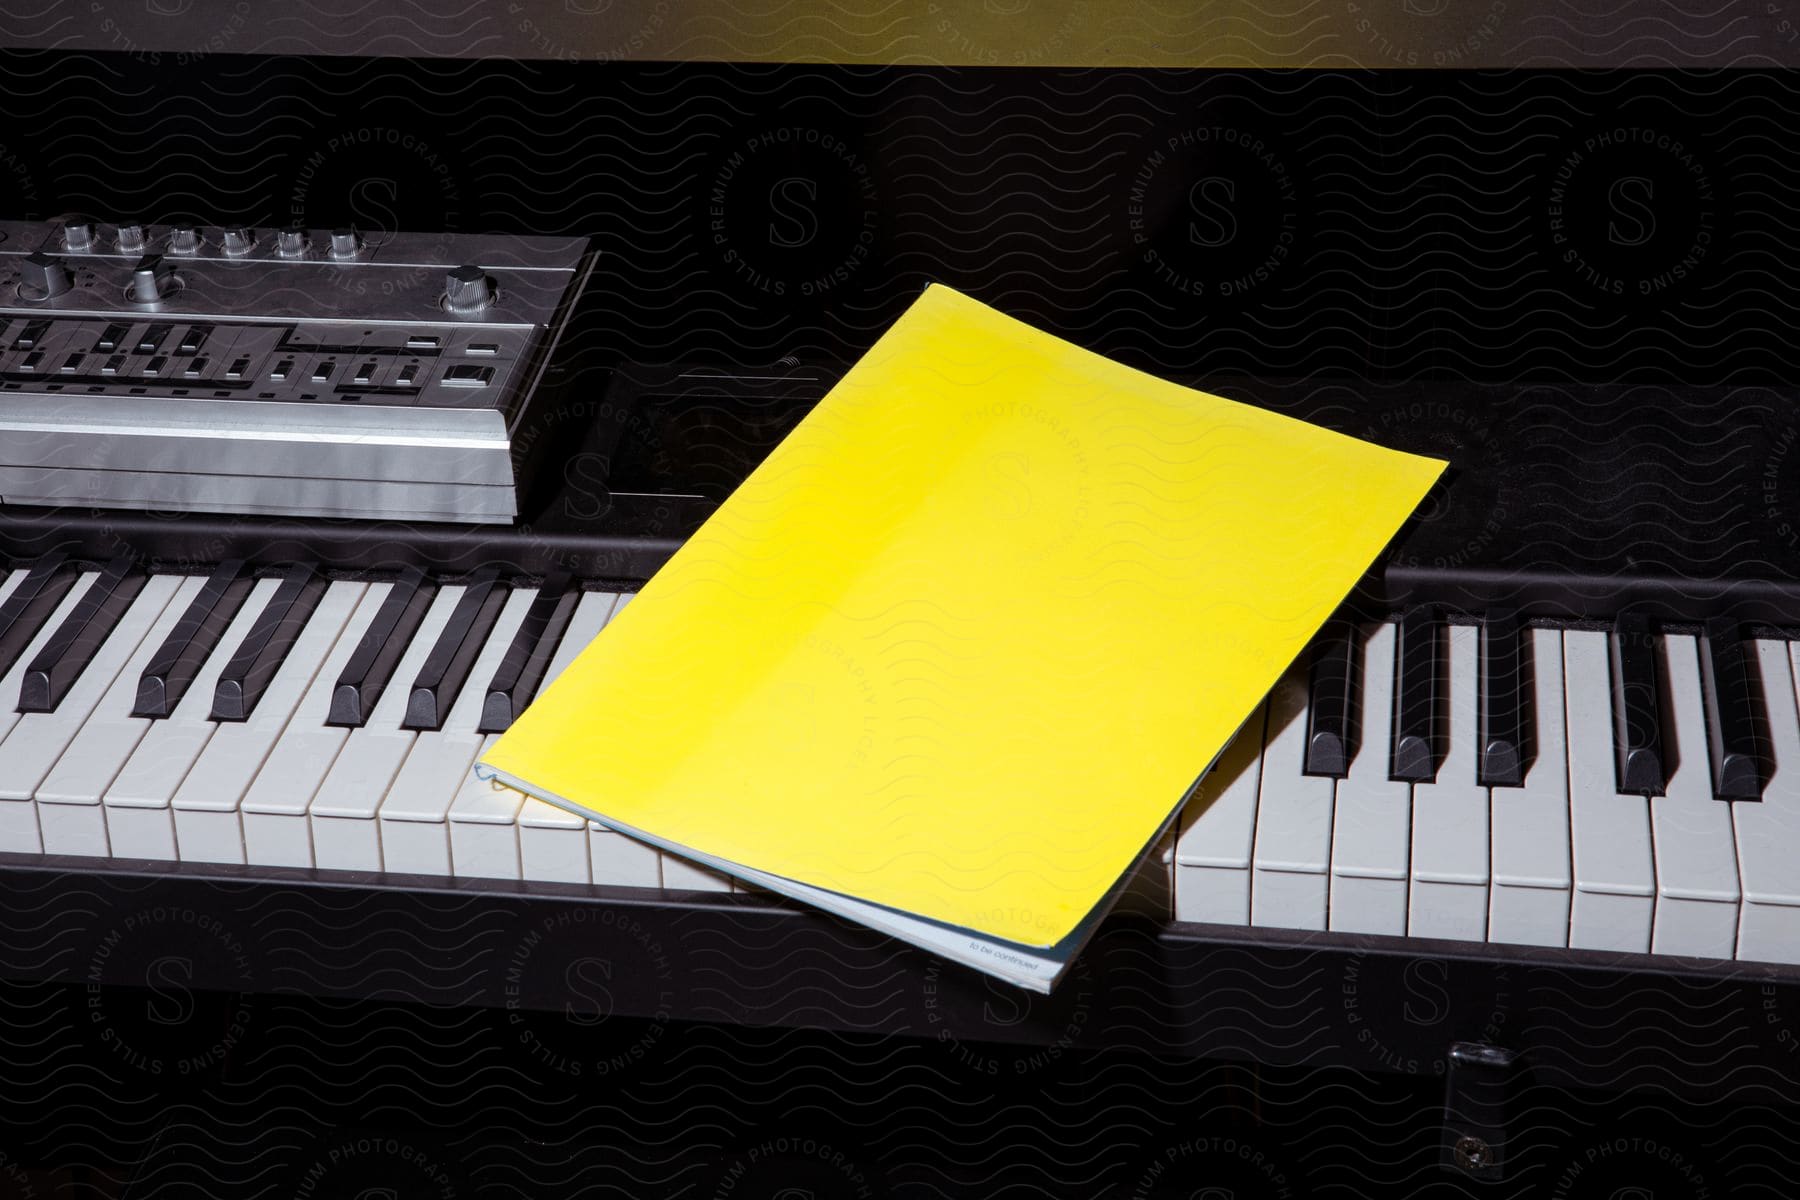 Stock photo of a bright yellow booklet is laying atop an electric piano in a darkened room.